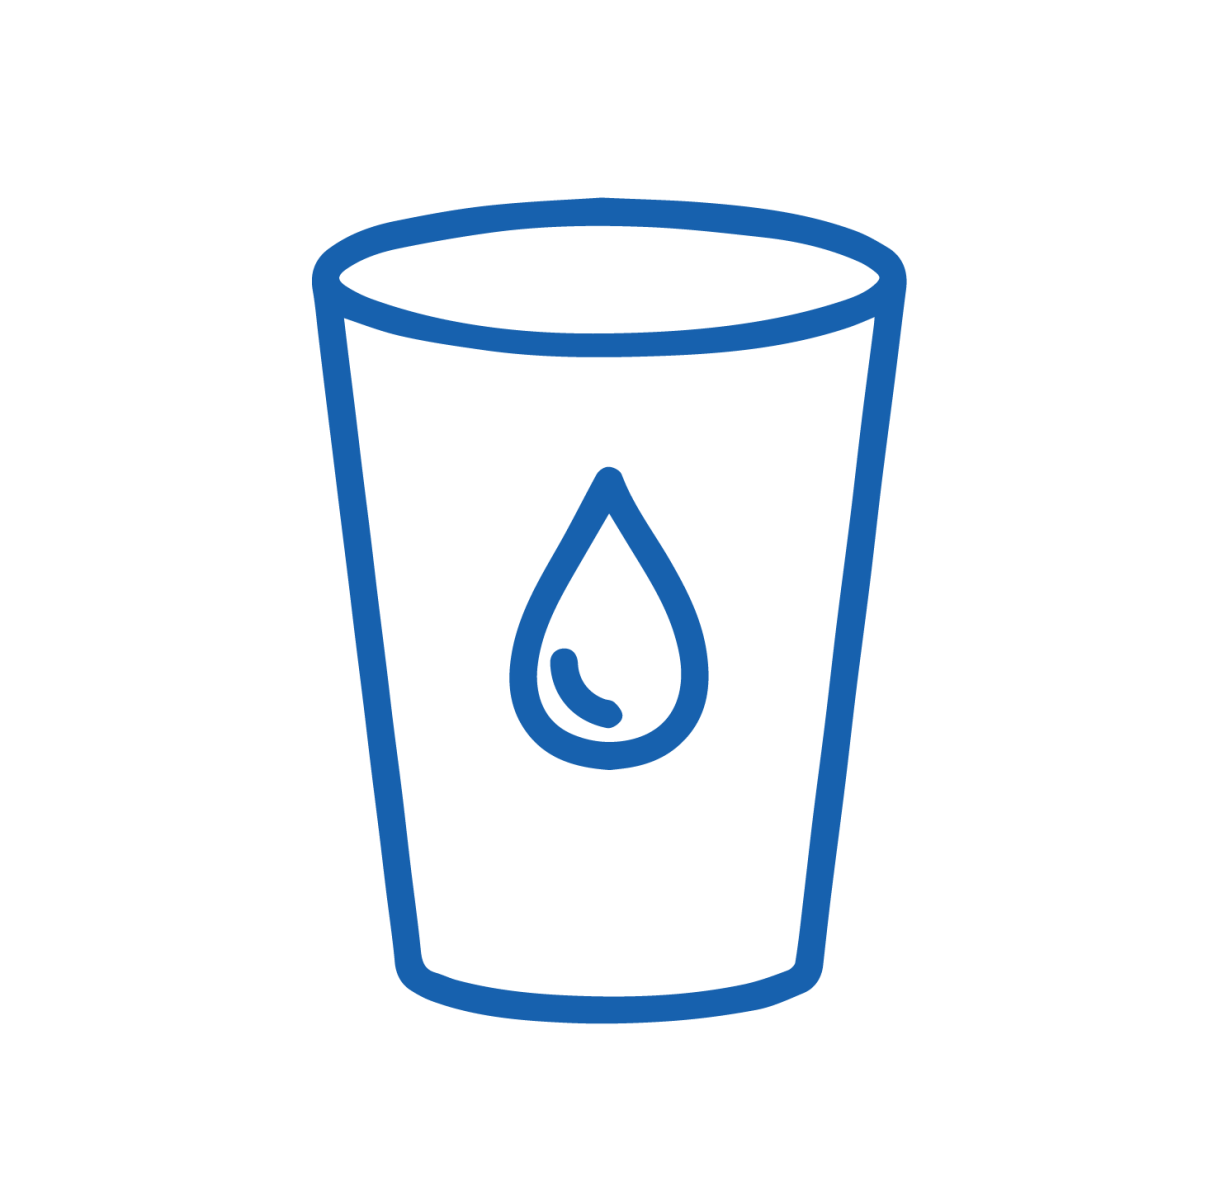 Drinking Glass Icon representing Safe Water Delivery